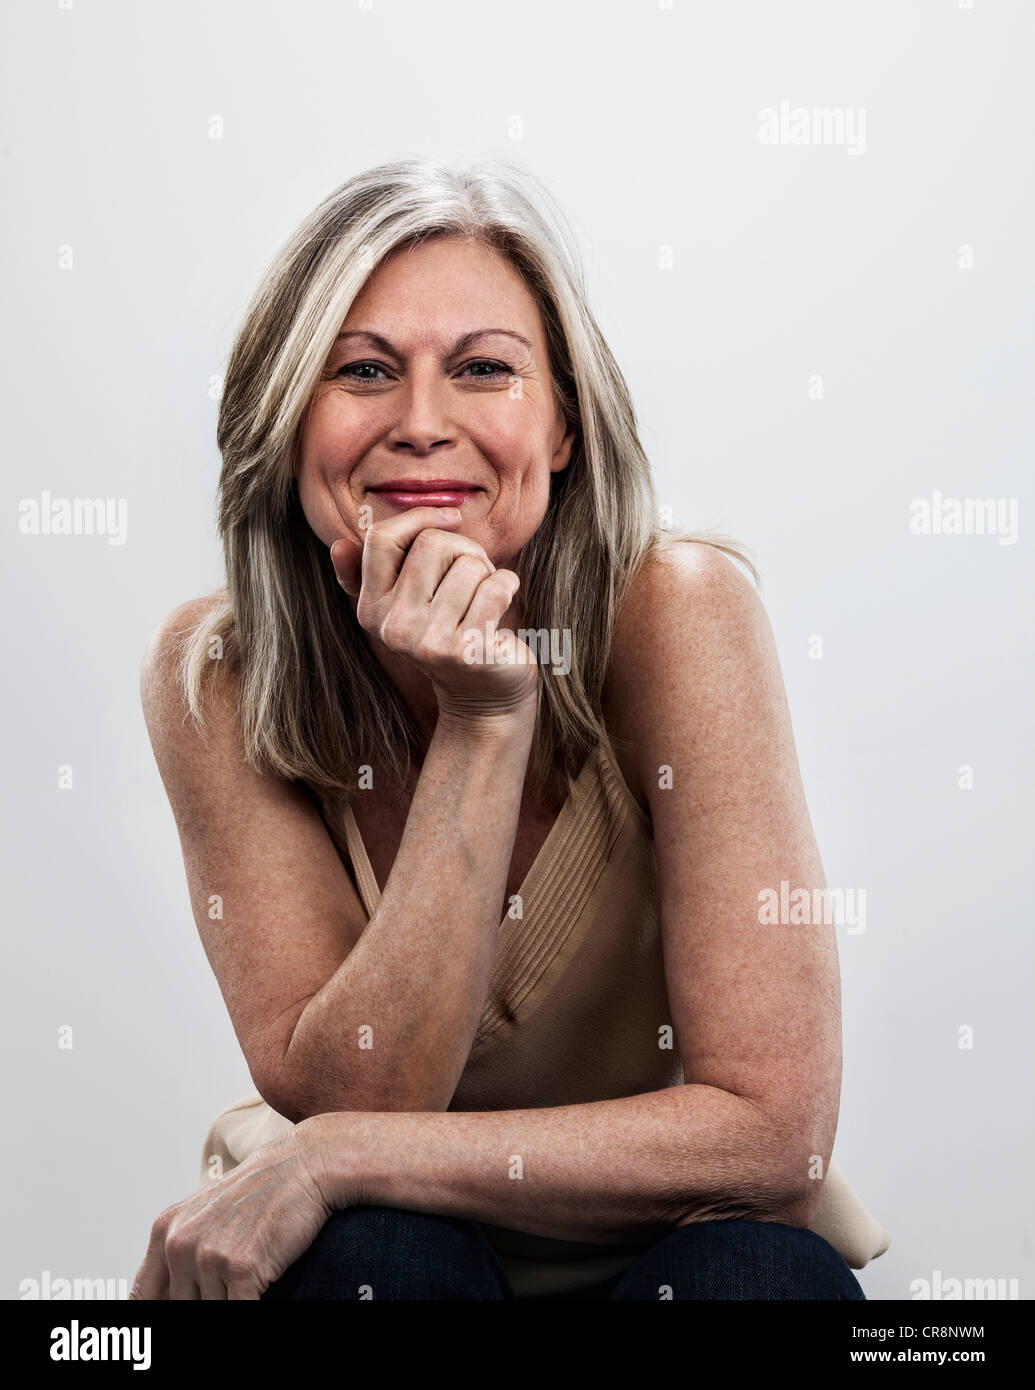 Mature woman with hand on chin Stock Photo